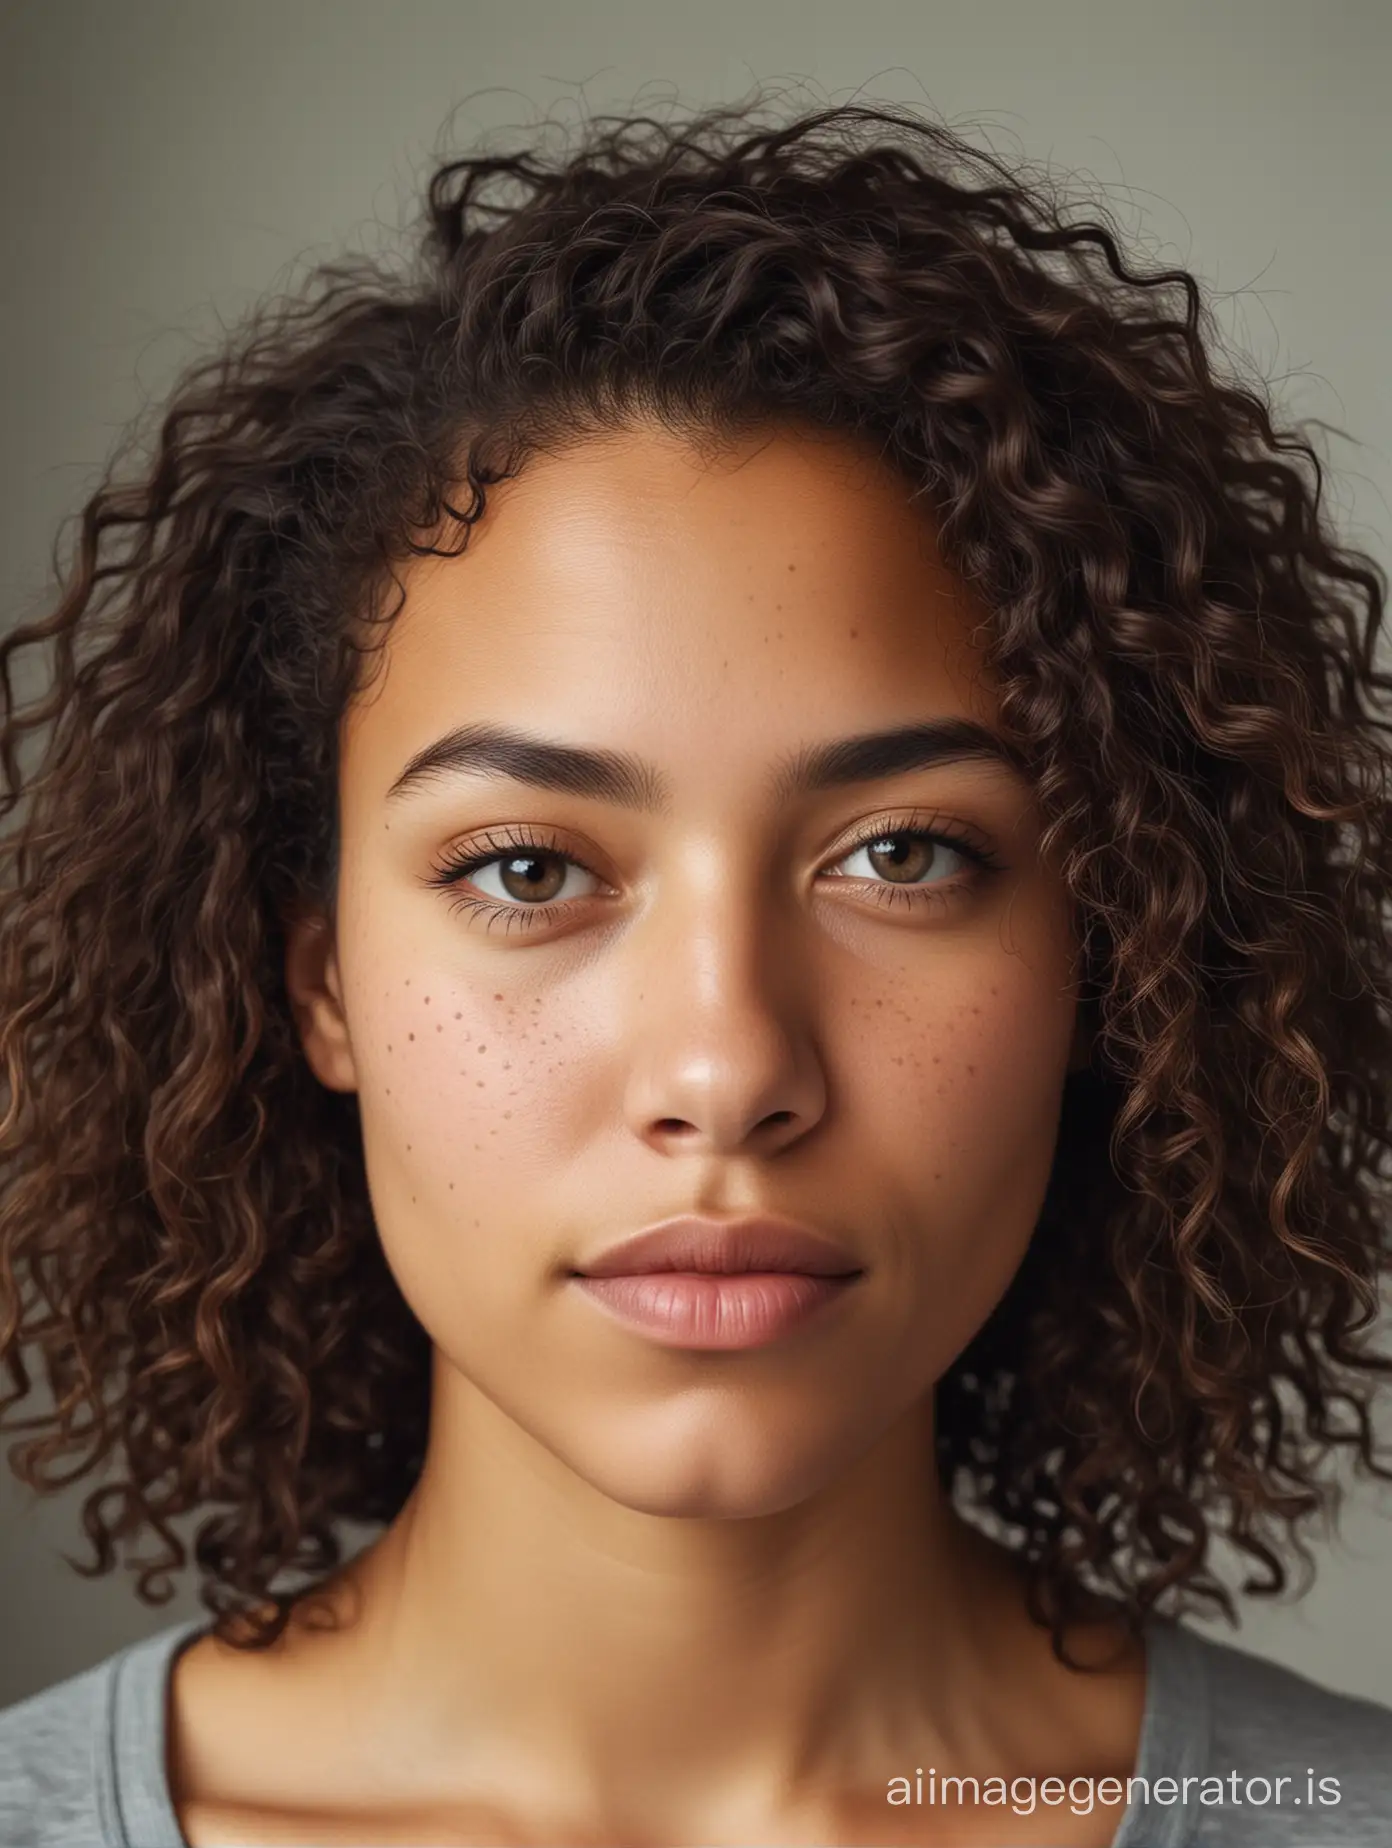 Confident-MixedRace-Woman-Embracing-Her-Authentic-Identity